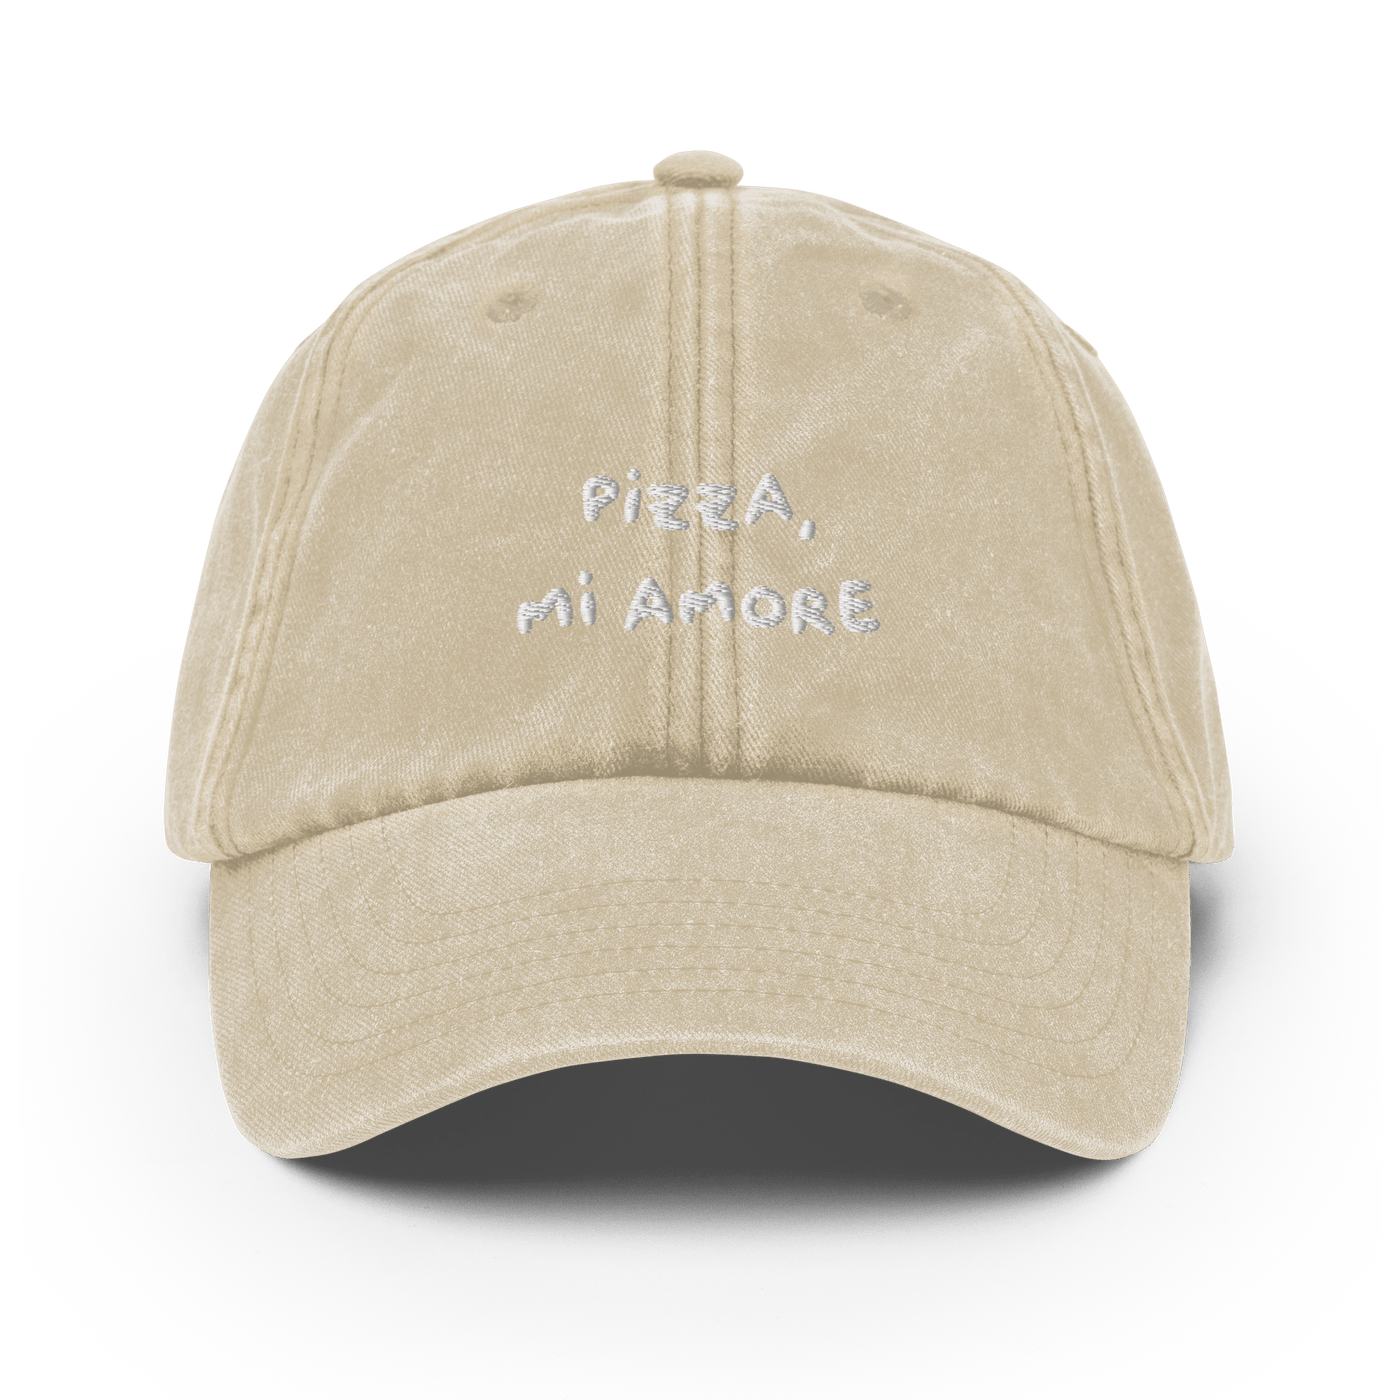 Pizza Mi Amore Vintage Hat - Vintage Stone - - Just Another Cap Store